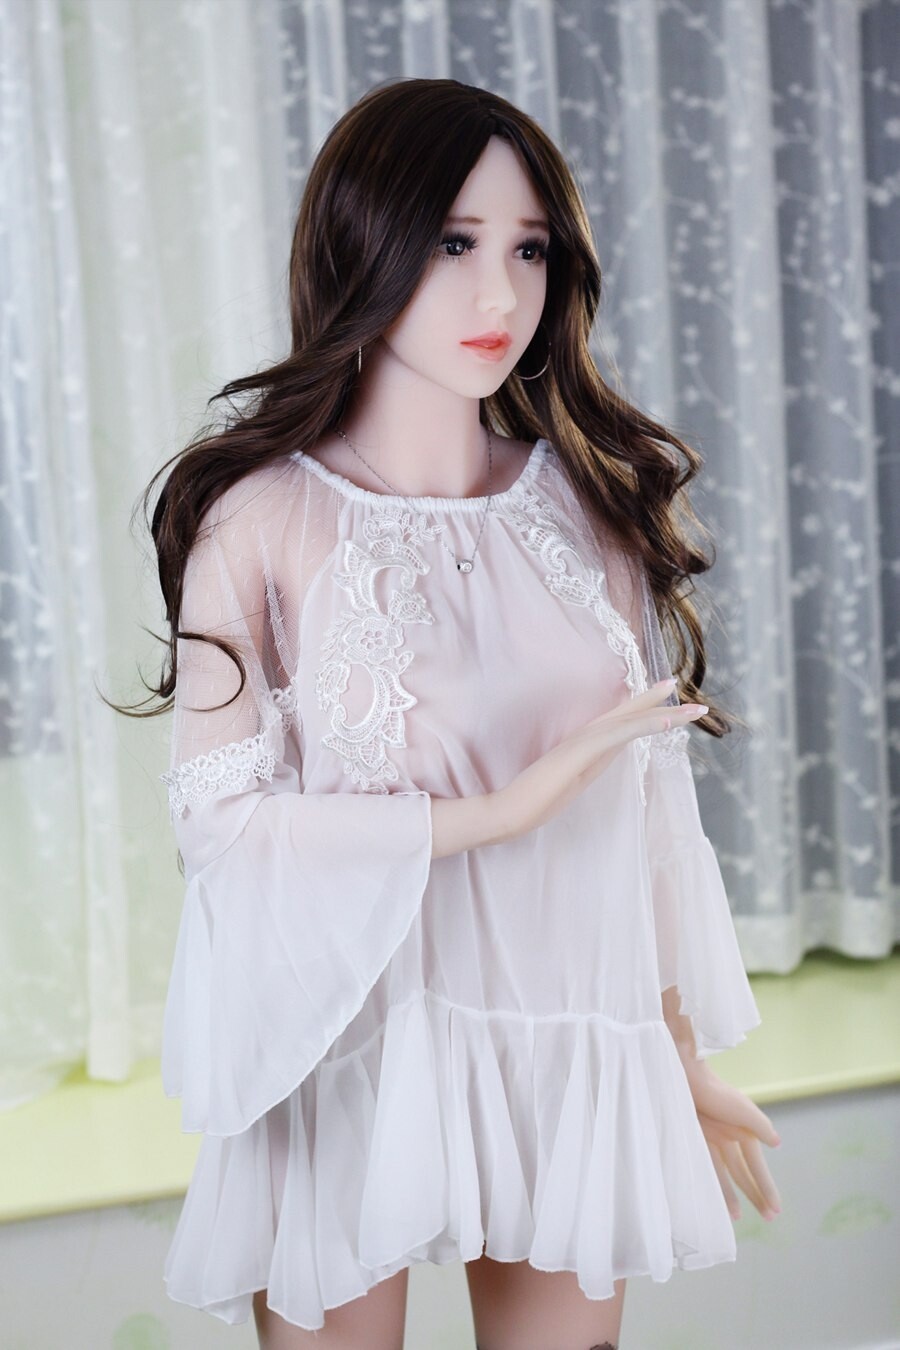 165cm Full body real silicone sex doll big breast for men